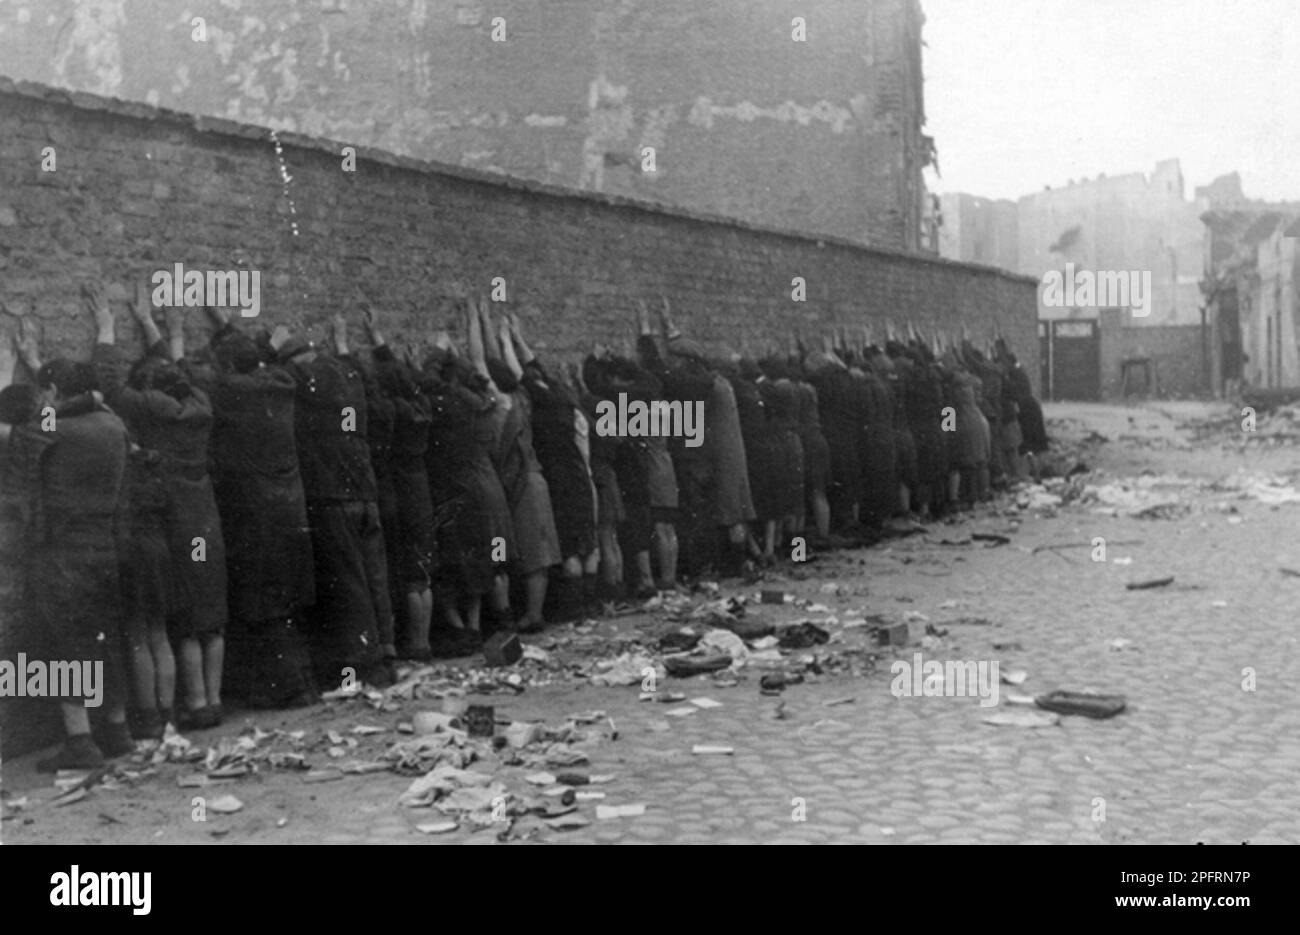 In January 1943 the nazis arrived to round up the Jews of the Warsaw Ghetto  The Jews, resolved to fight it out, took on the SS with homemade and primitive weapons. The defenders were executed or deported and the Ghetto area was systematically demolished. This event is known as The Ghetto Uprising. This image shows Jews captured by the SS during the suppression of the Warsaw Ghetto Uprising are lined up against a wall prior to being searched for weapons. This image is from the German photographic record of the event, known as the Stroop report. Stock Photo